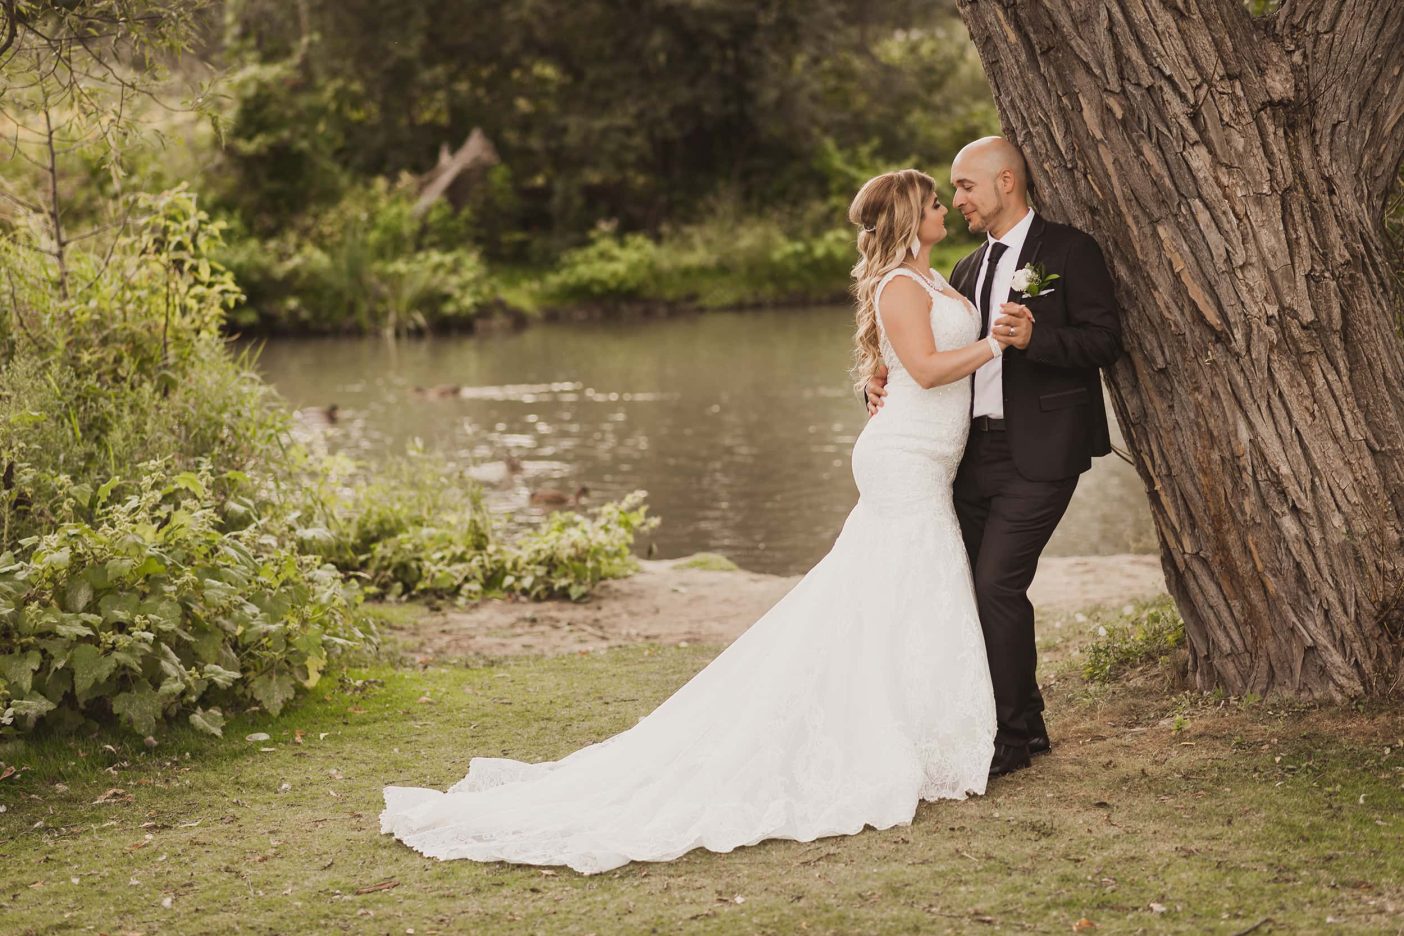 A bride and groom hold each other by a lake.